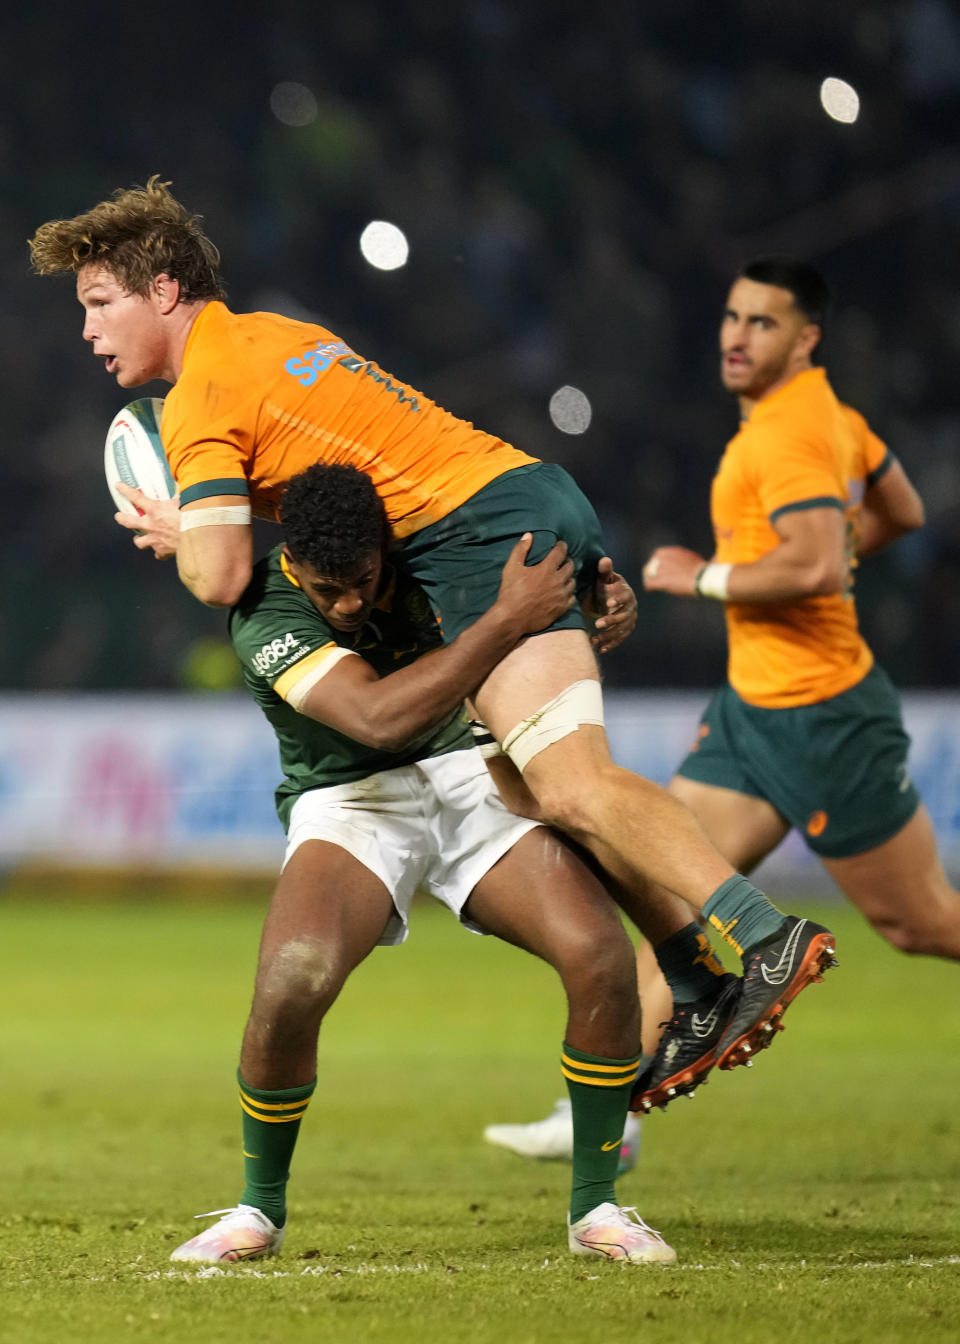 Australia's Michael Hooper, top, is tackled by South Africa's Canan Moodie during the Rugby Championship test match between South Africa and Australia at Loftus Versfeld stadium in Pretoria, South Africa, Saturday, July 8, 2023. (AP Photo/Themba Hadebe)